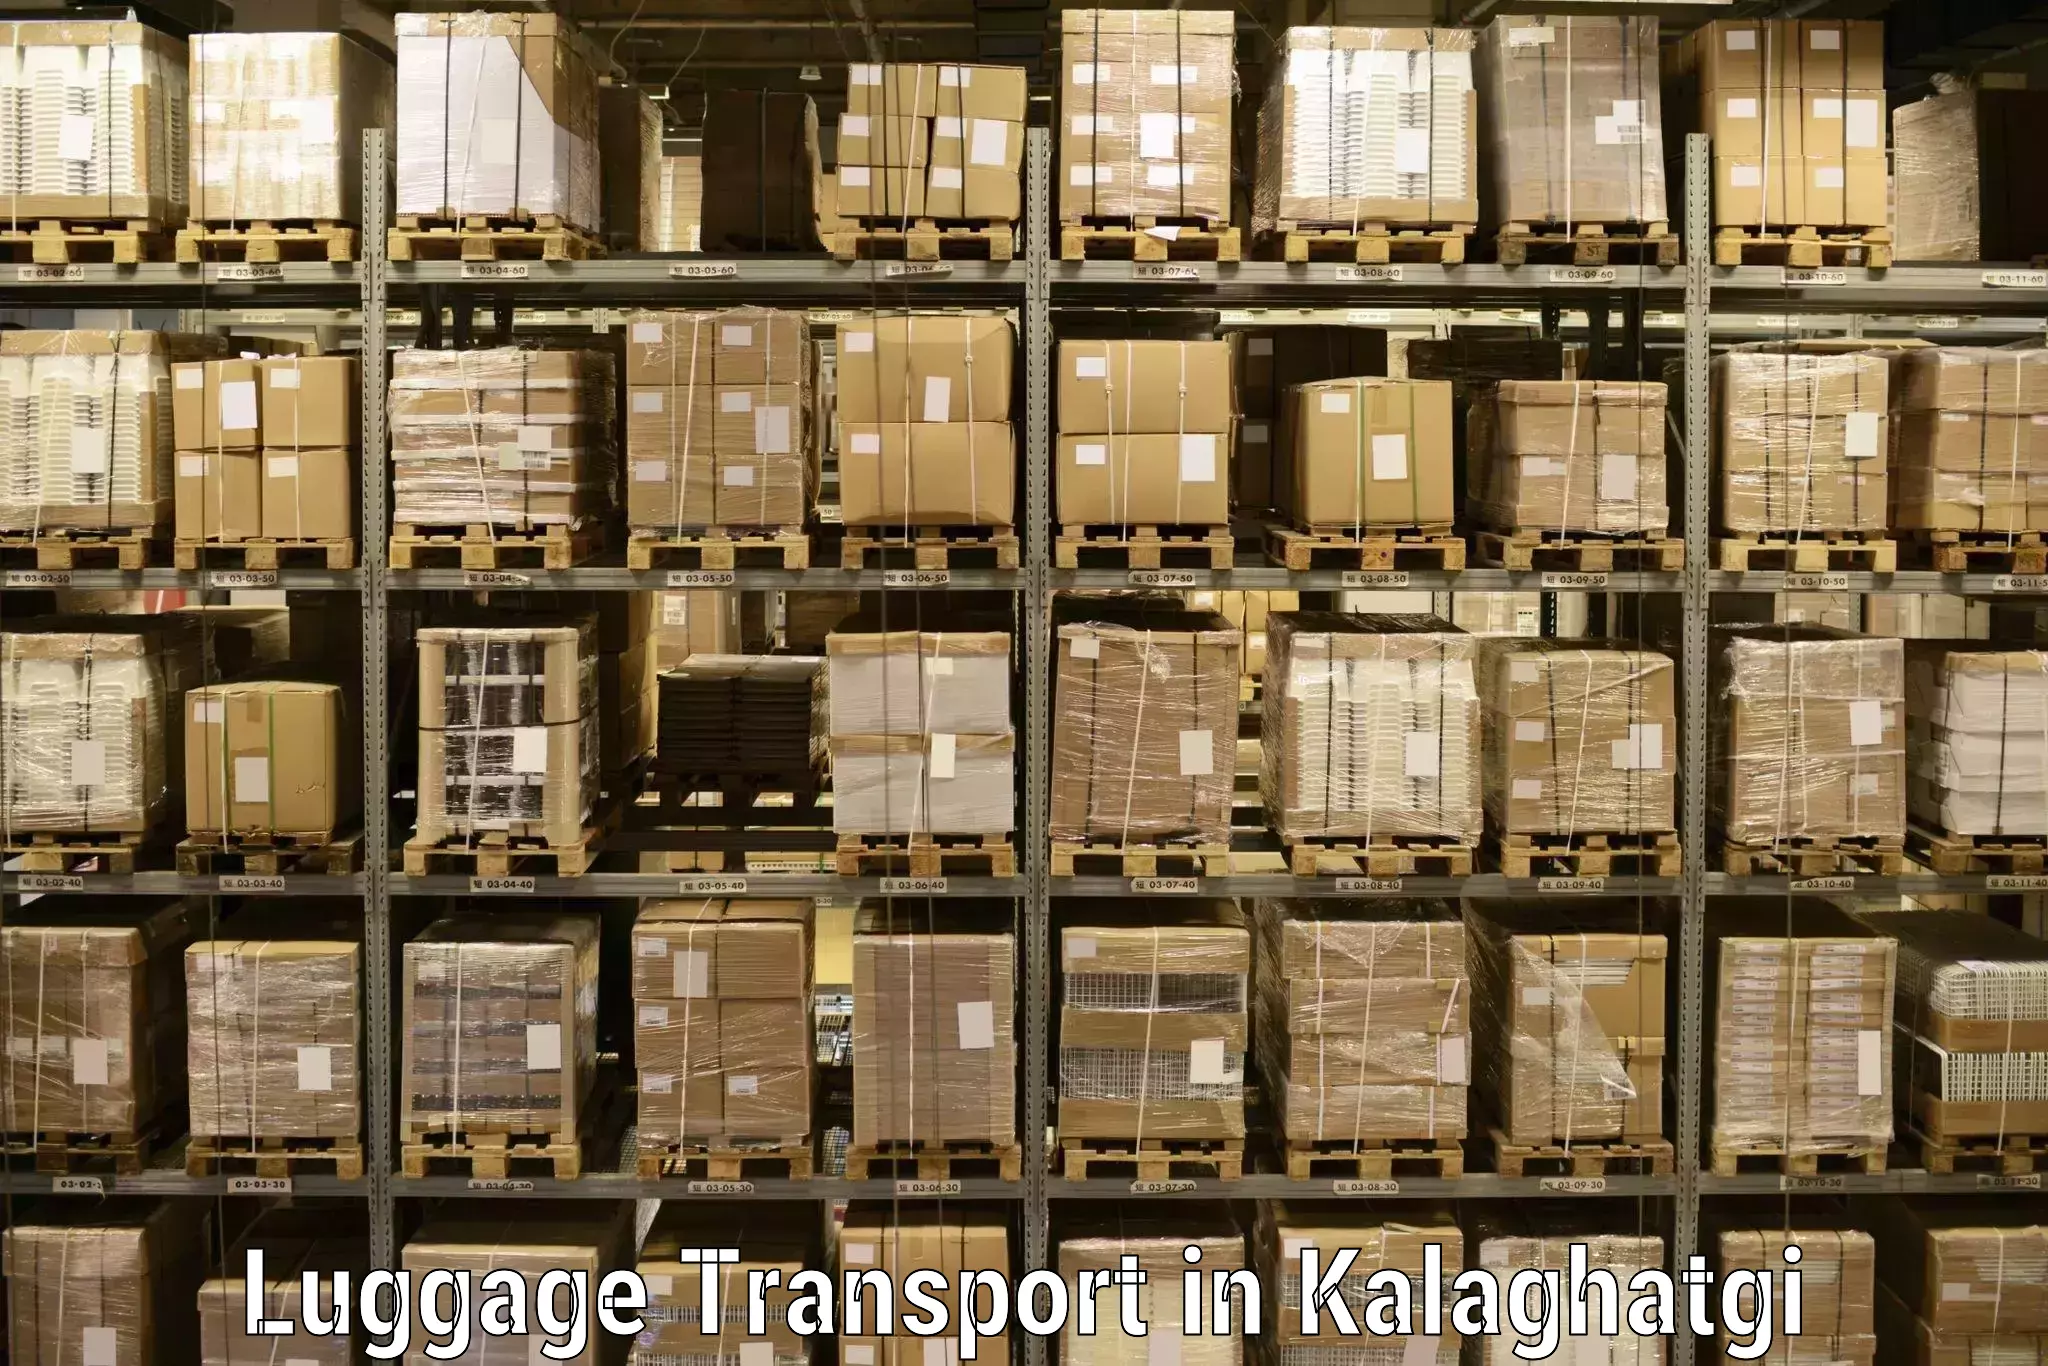 Baggage transport quote in Kalaghatgi